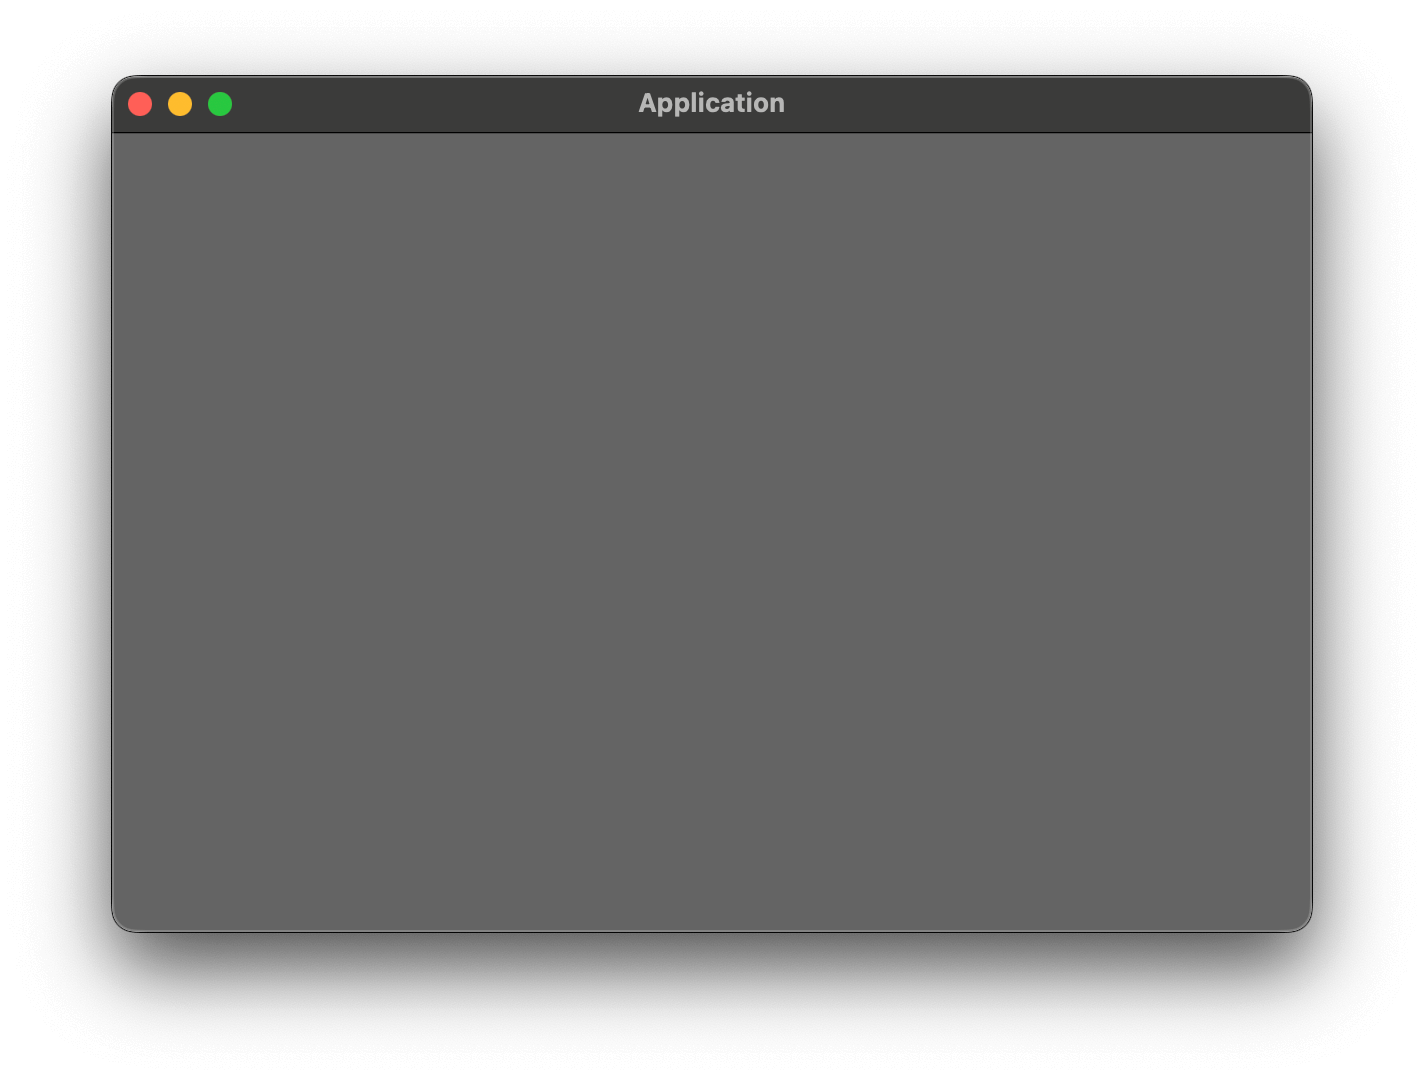 A basic application window in gray with a window title of Application.